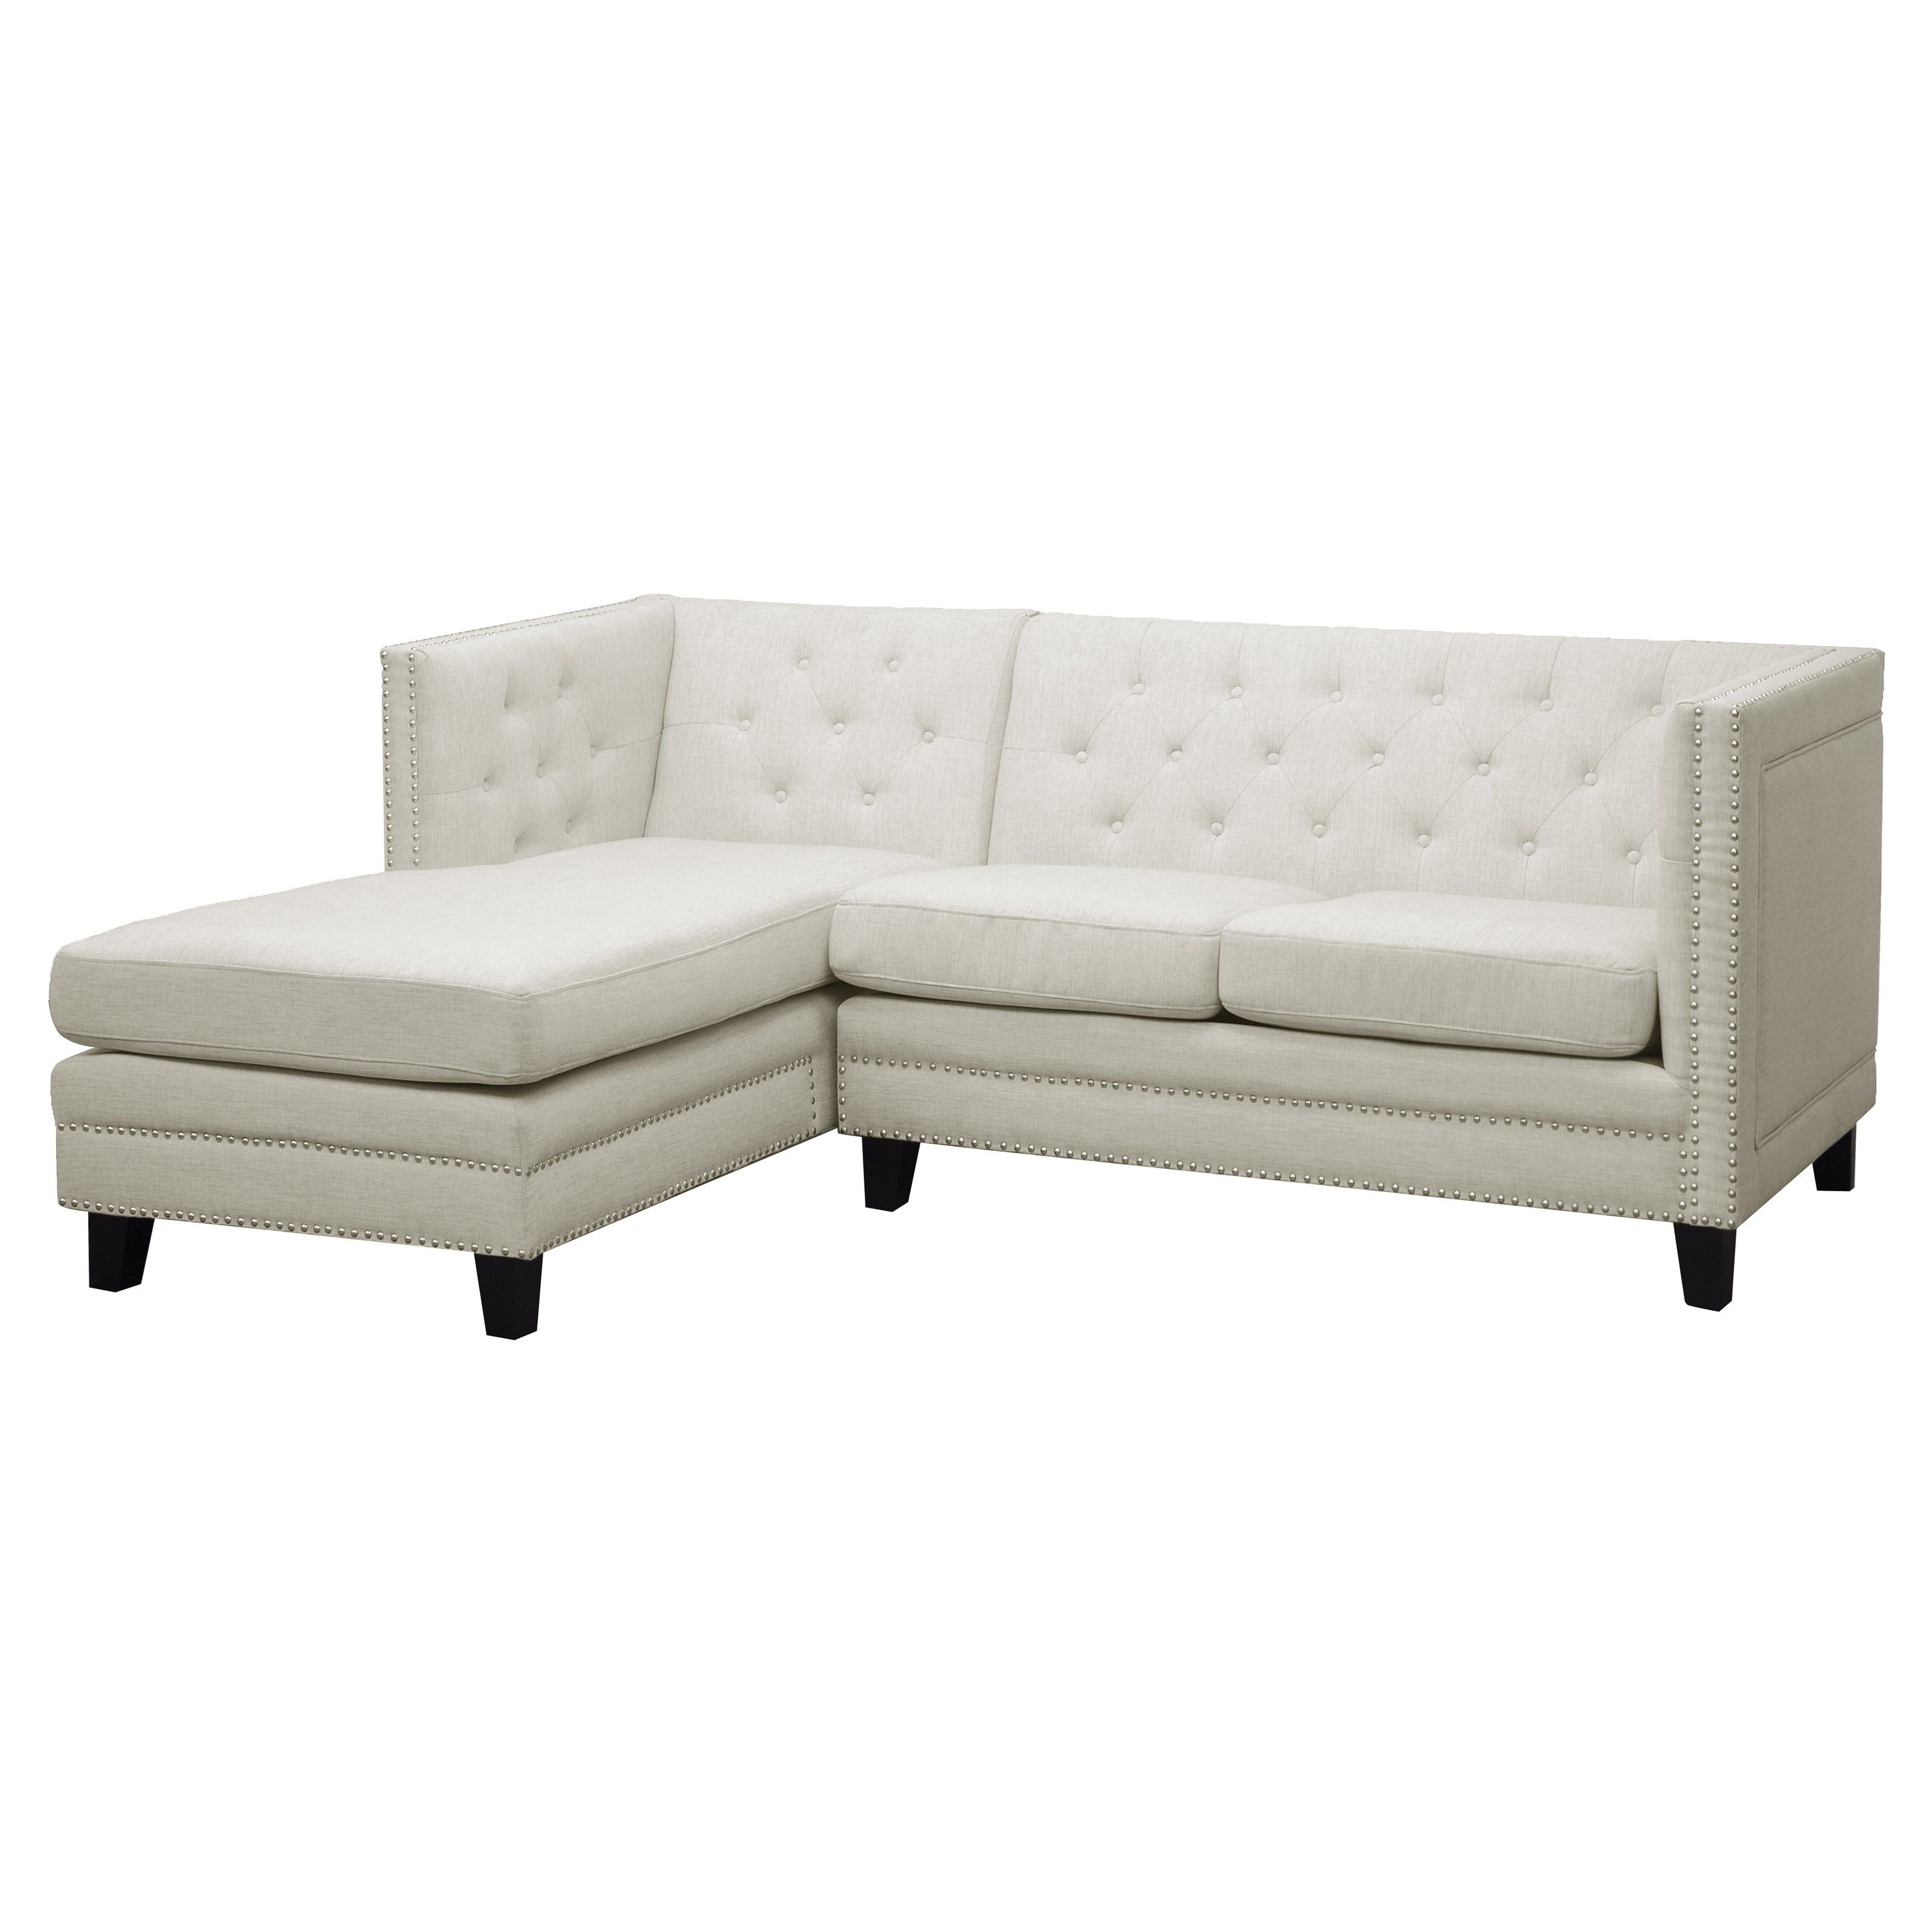 Chaise Lounge Sleepers Within Trendy Idyllic White Tuxedo Tufted Sectional With Chaise Lounge Sleepers (View 10 of 15)